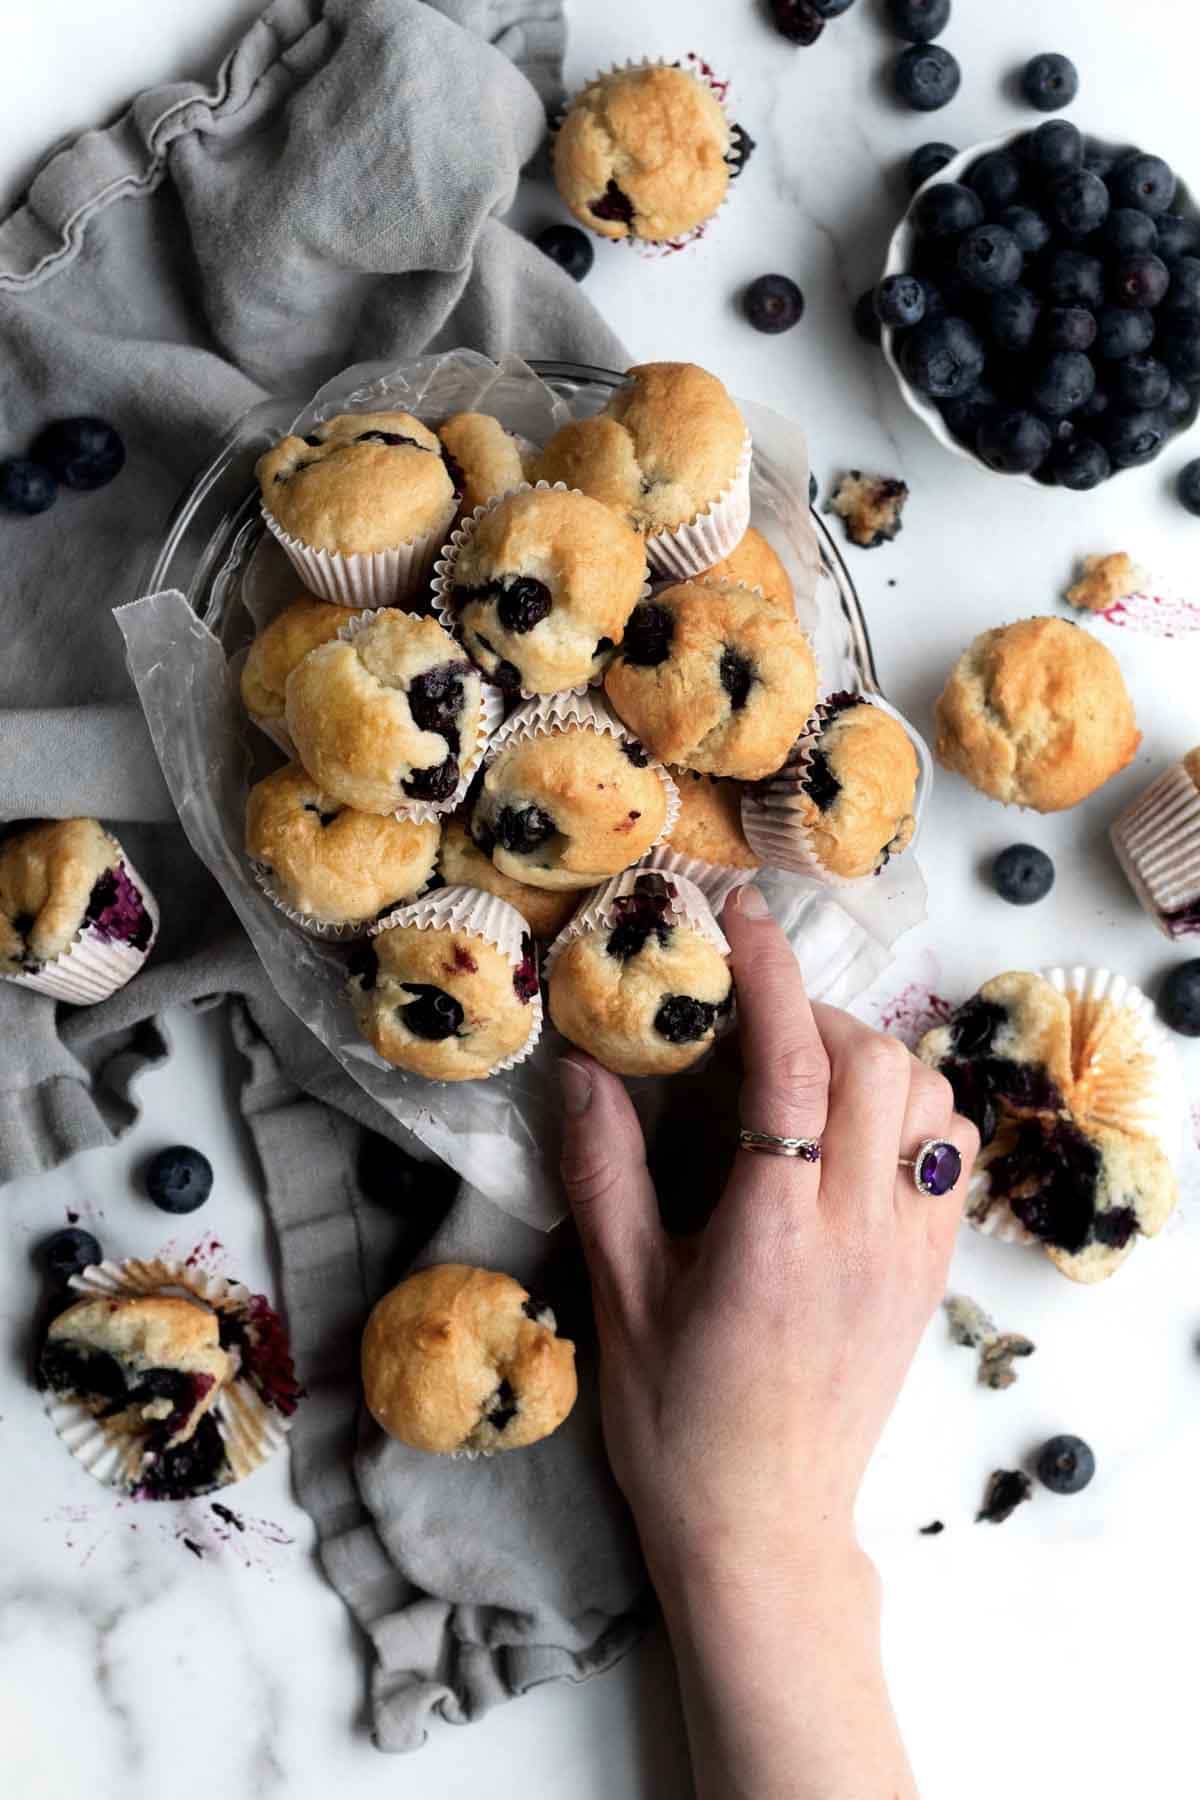 A hand grabs a Gluten Free Blueberry Muffin from a bowl.